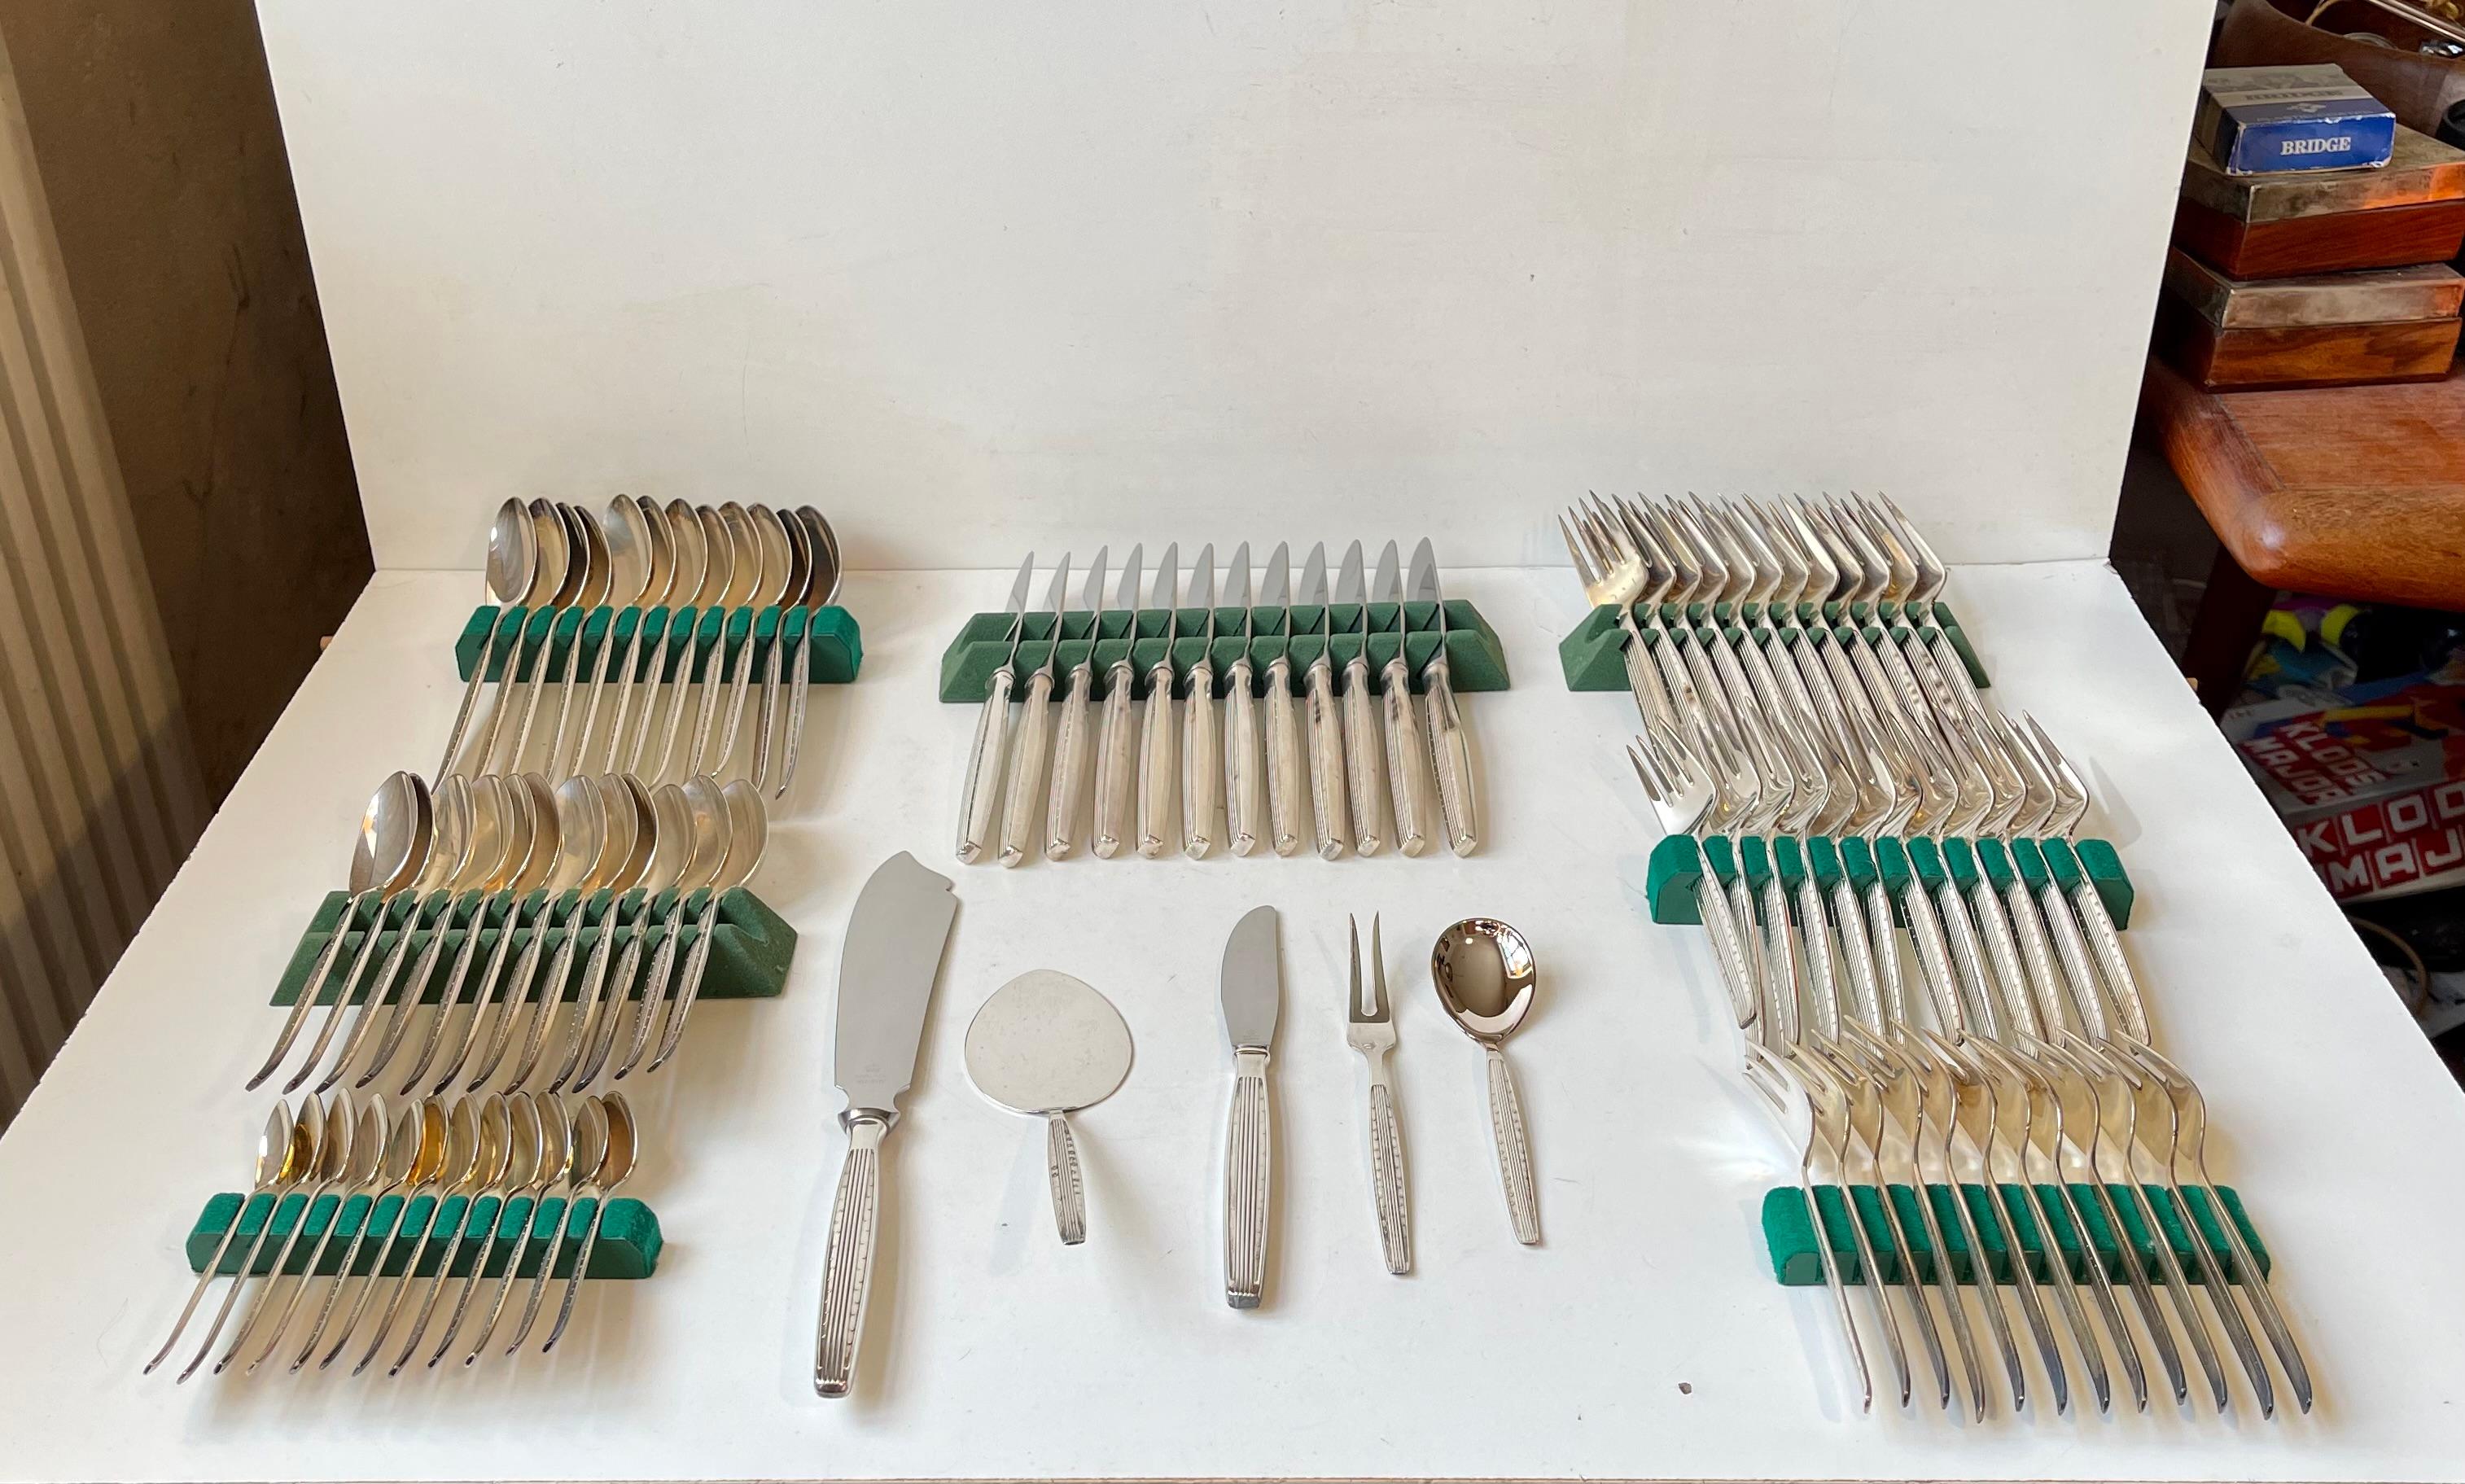 Extensive flatware cutlery set designed and made by Kristian J. Andersen - for his own company KJA in Fredericia Denmark during the 1960s. Stylistically its inspired from Art Deco architecture with its vertically fluted handles, stylish relief dots